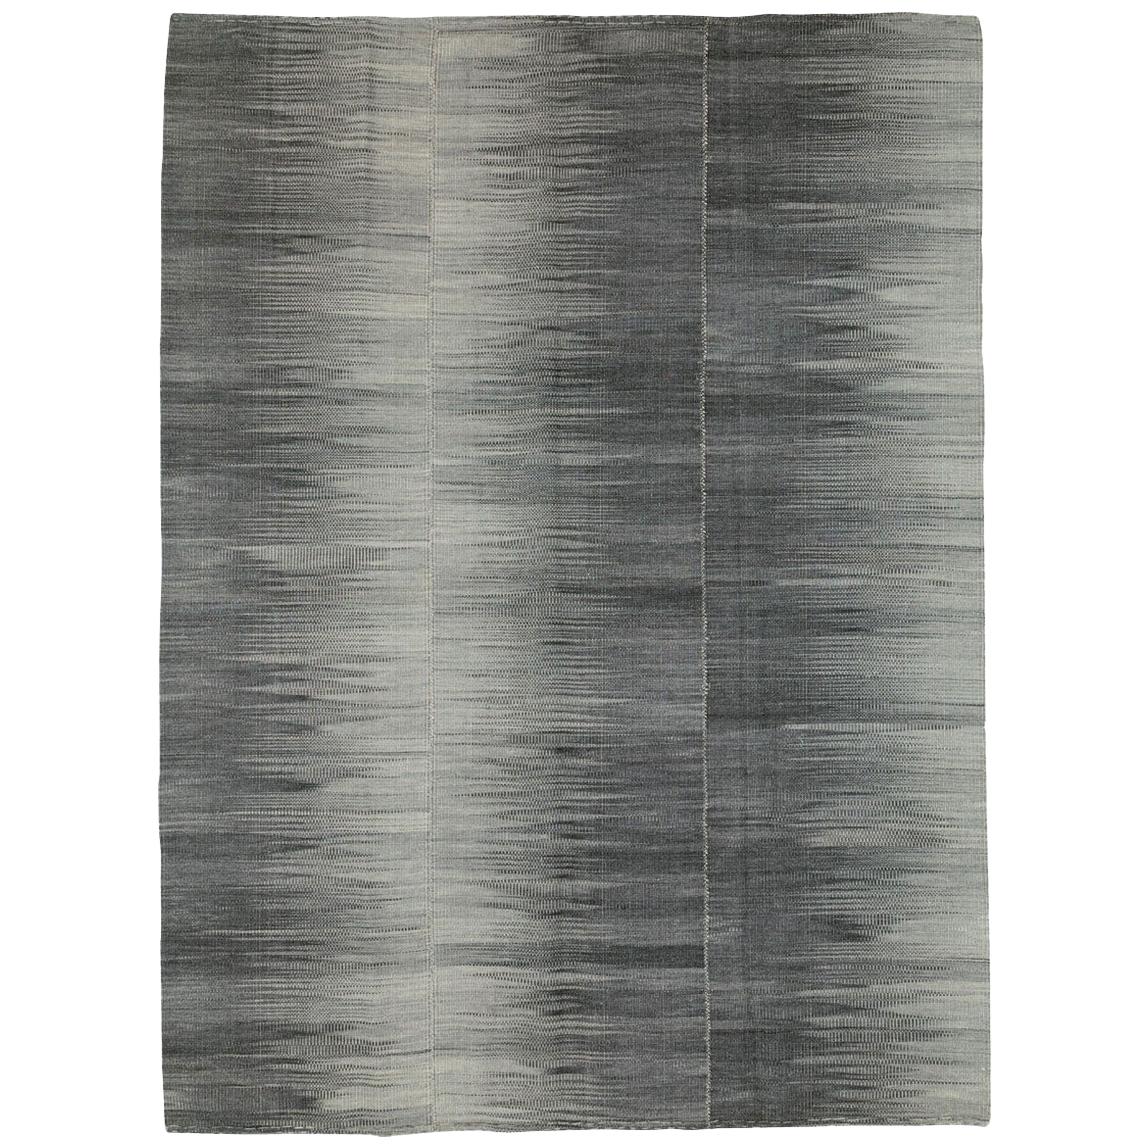 Contemporary Handmade Turkish Flat-Weave Accent Rug in Black Charcoal Grey